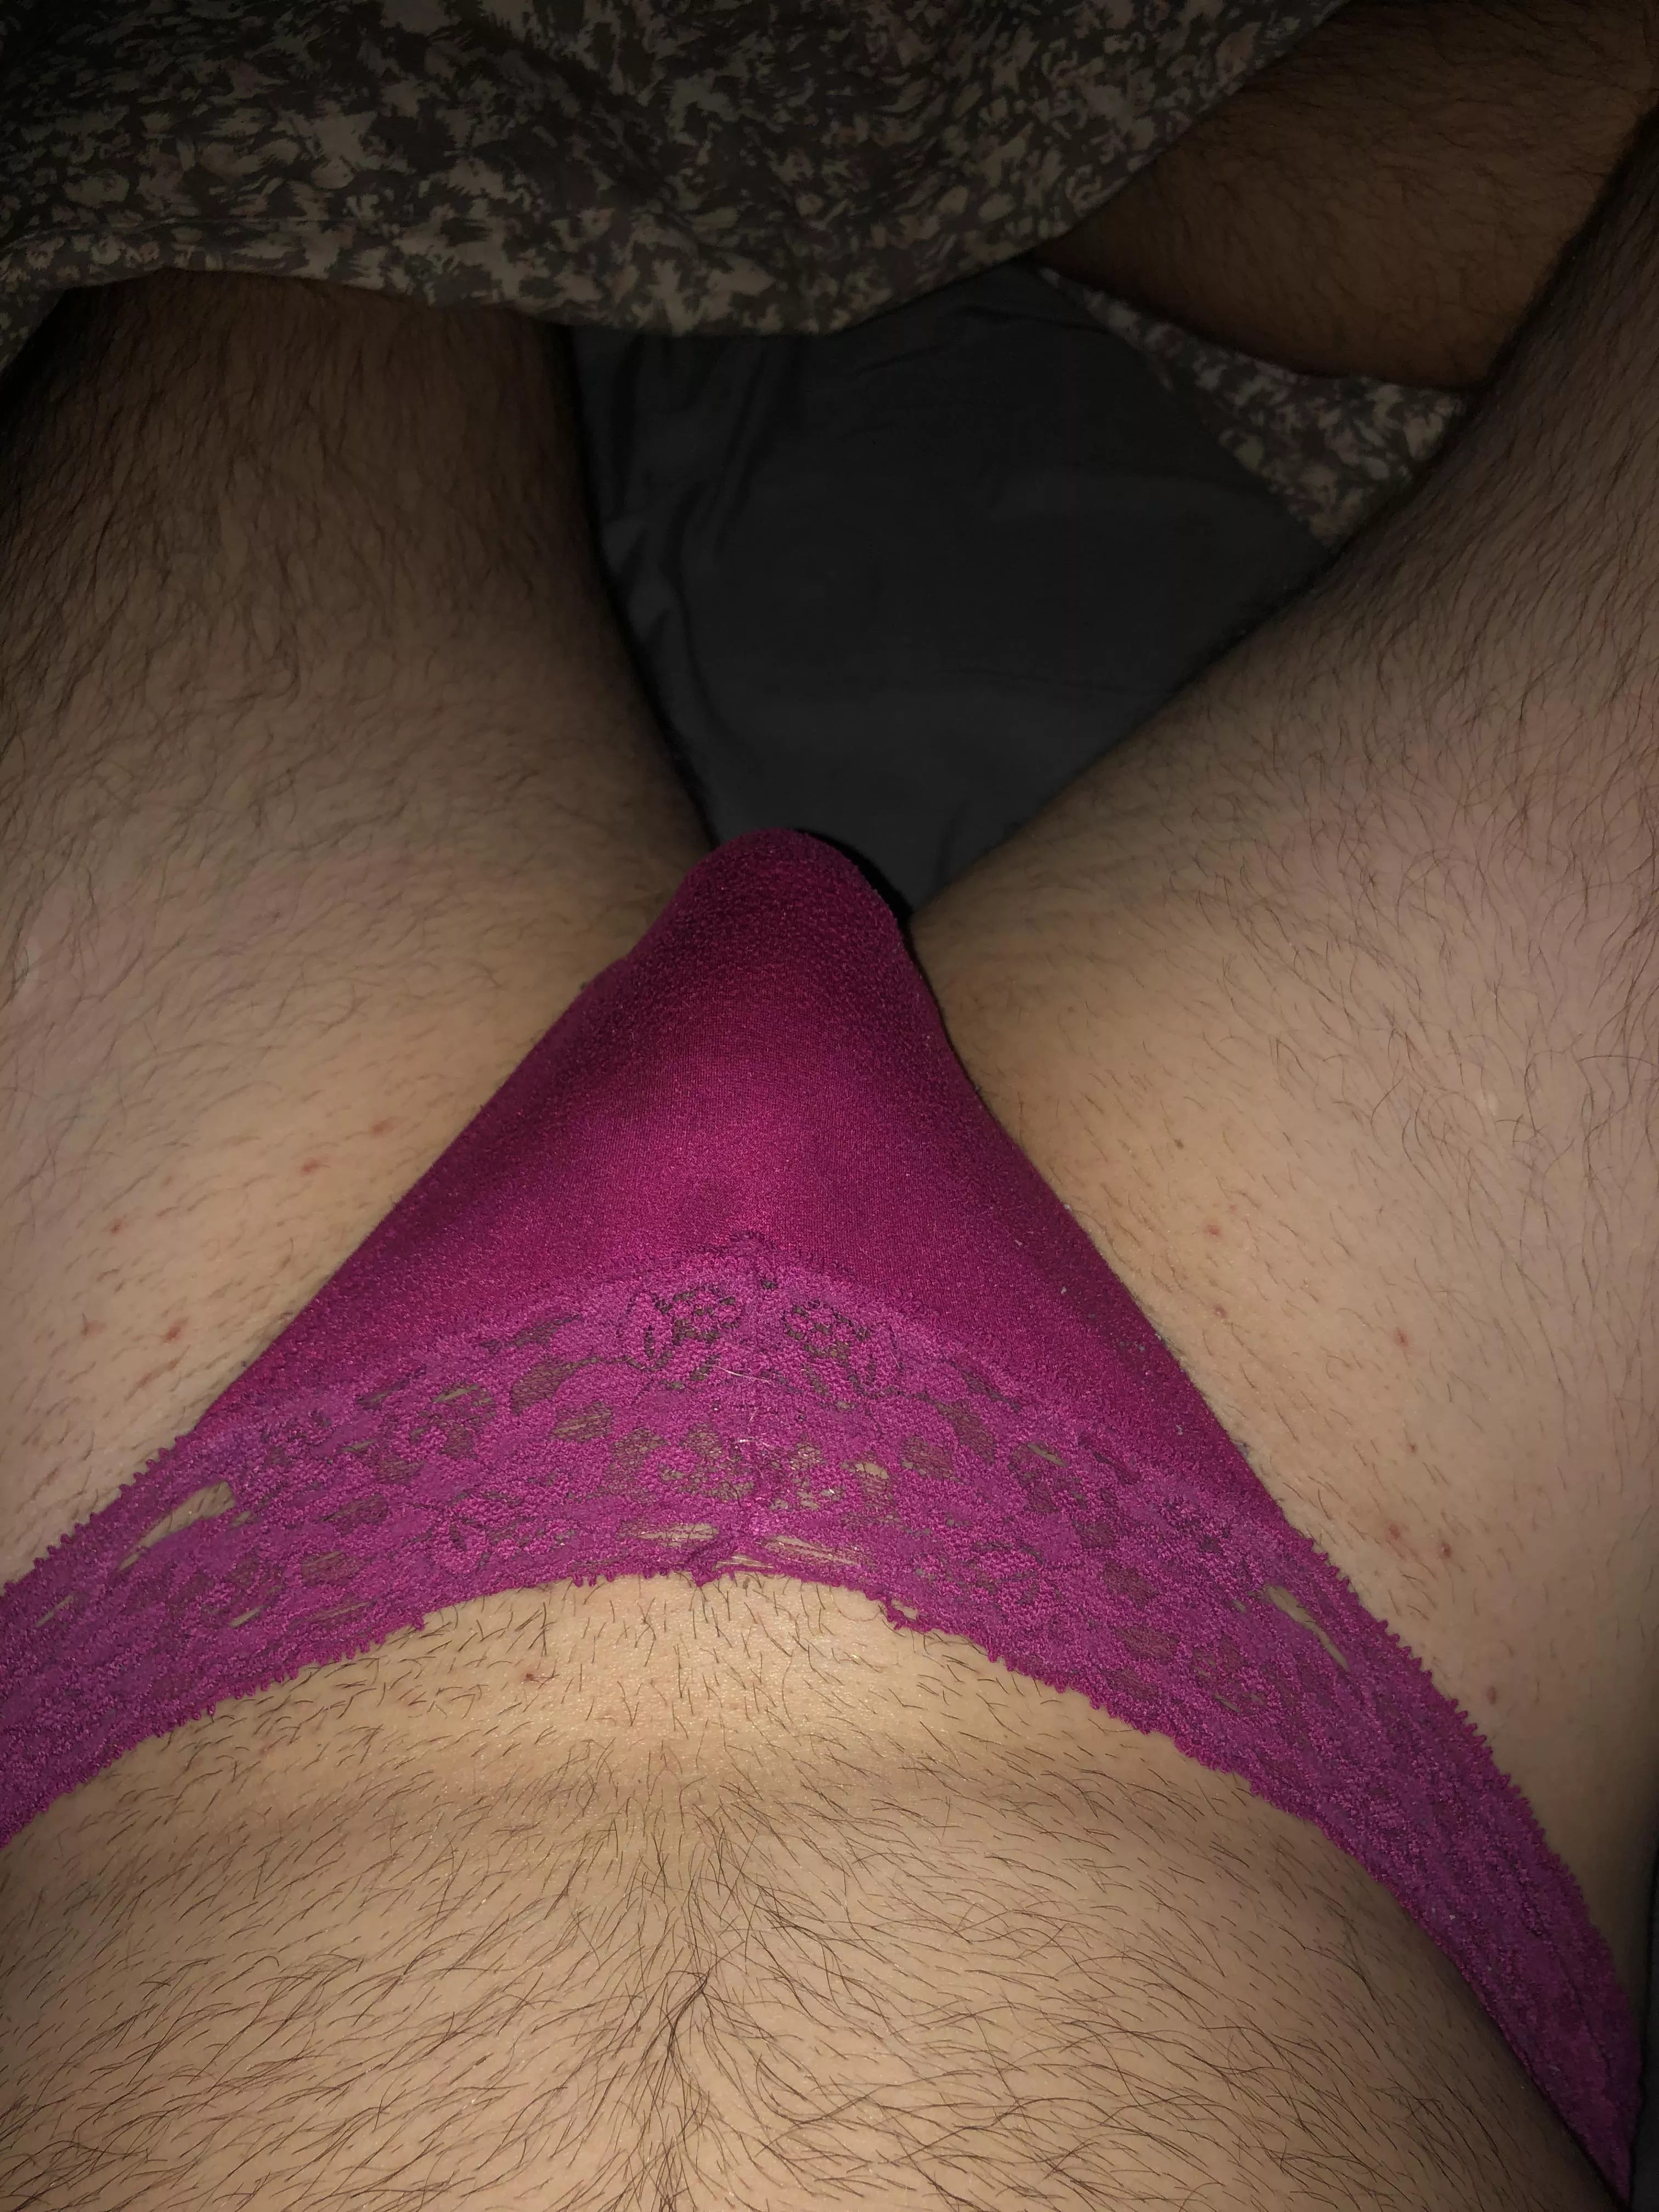 Borrowed These From My Unknowing Wife Nudes Men In Panties Nude